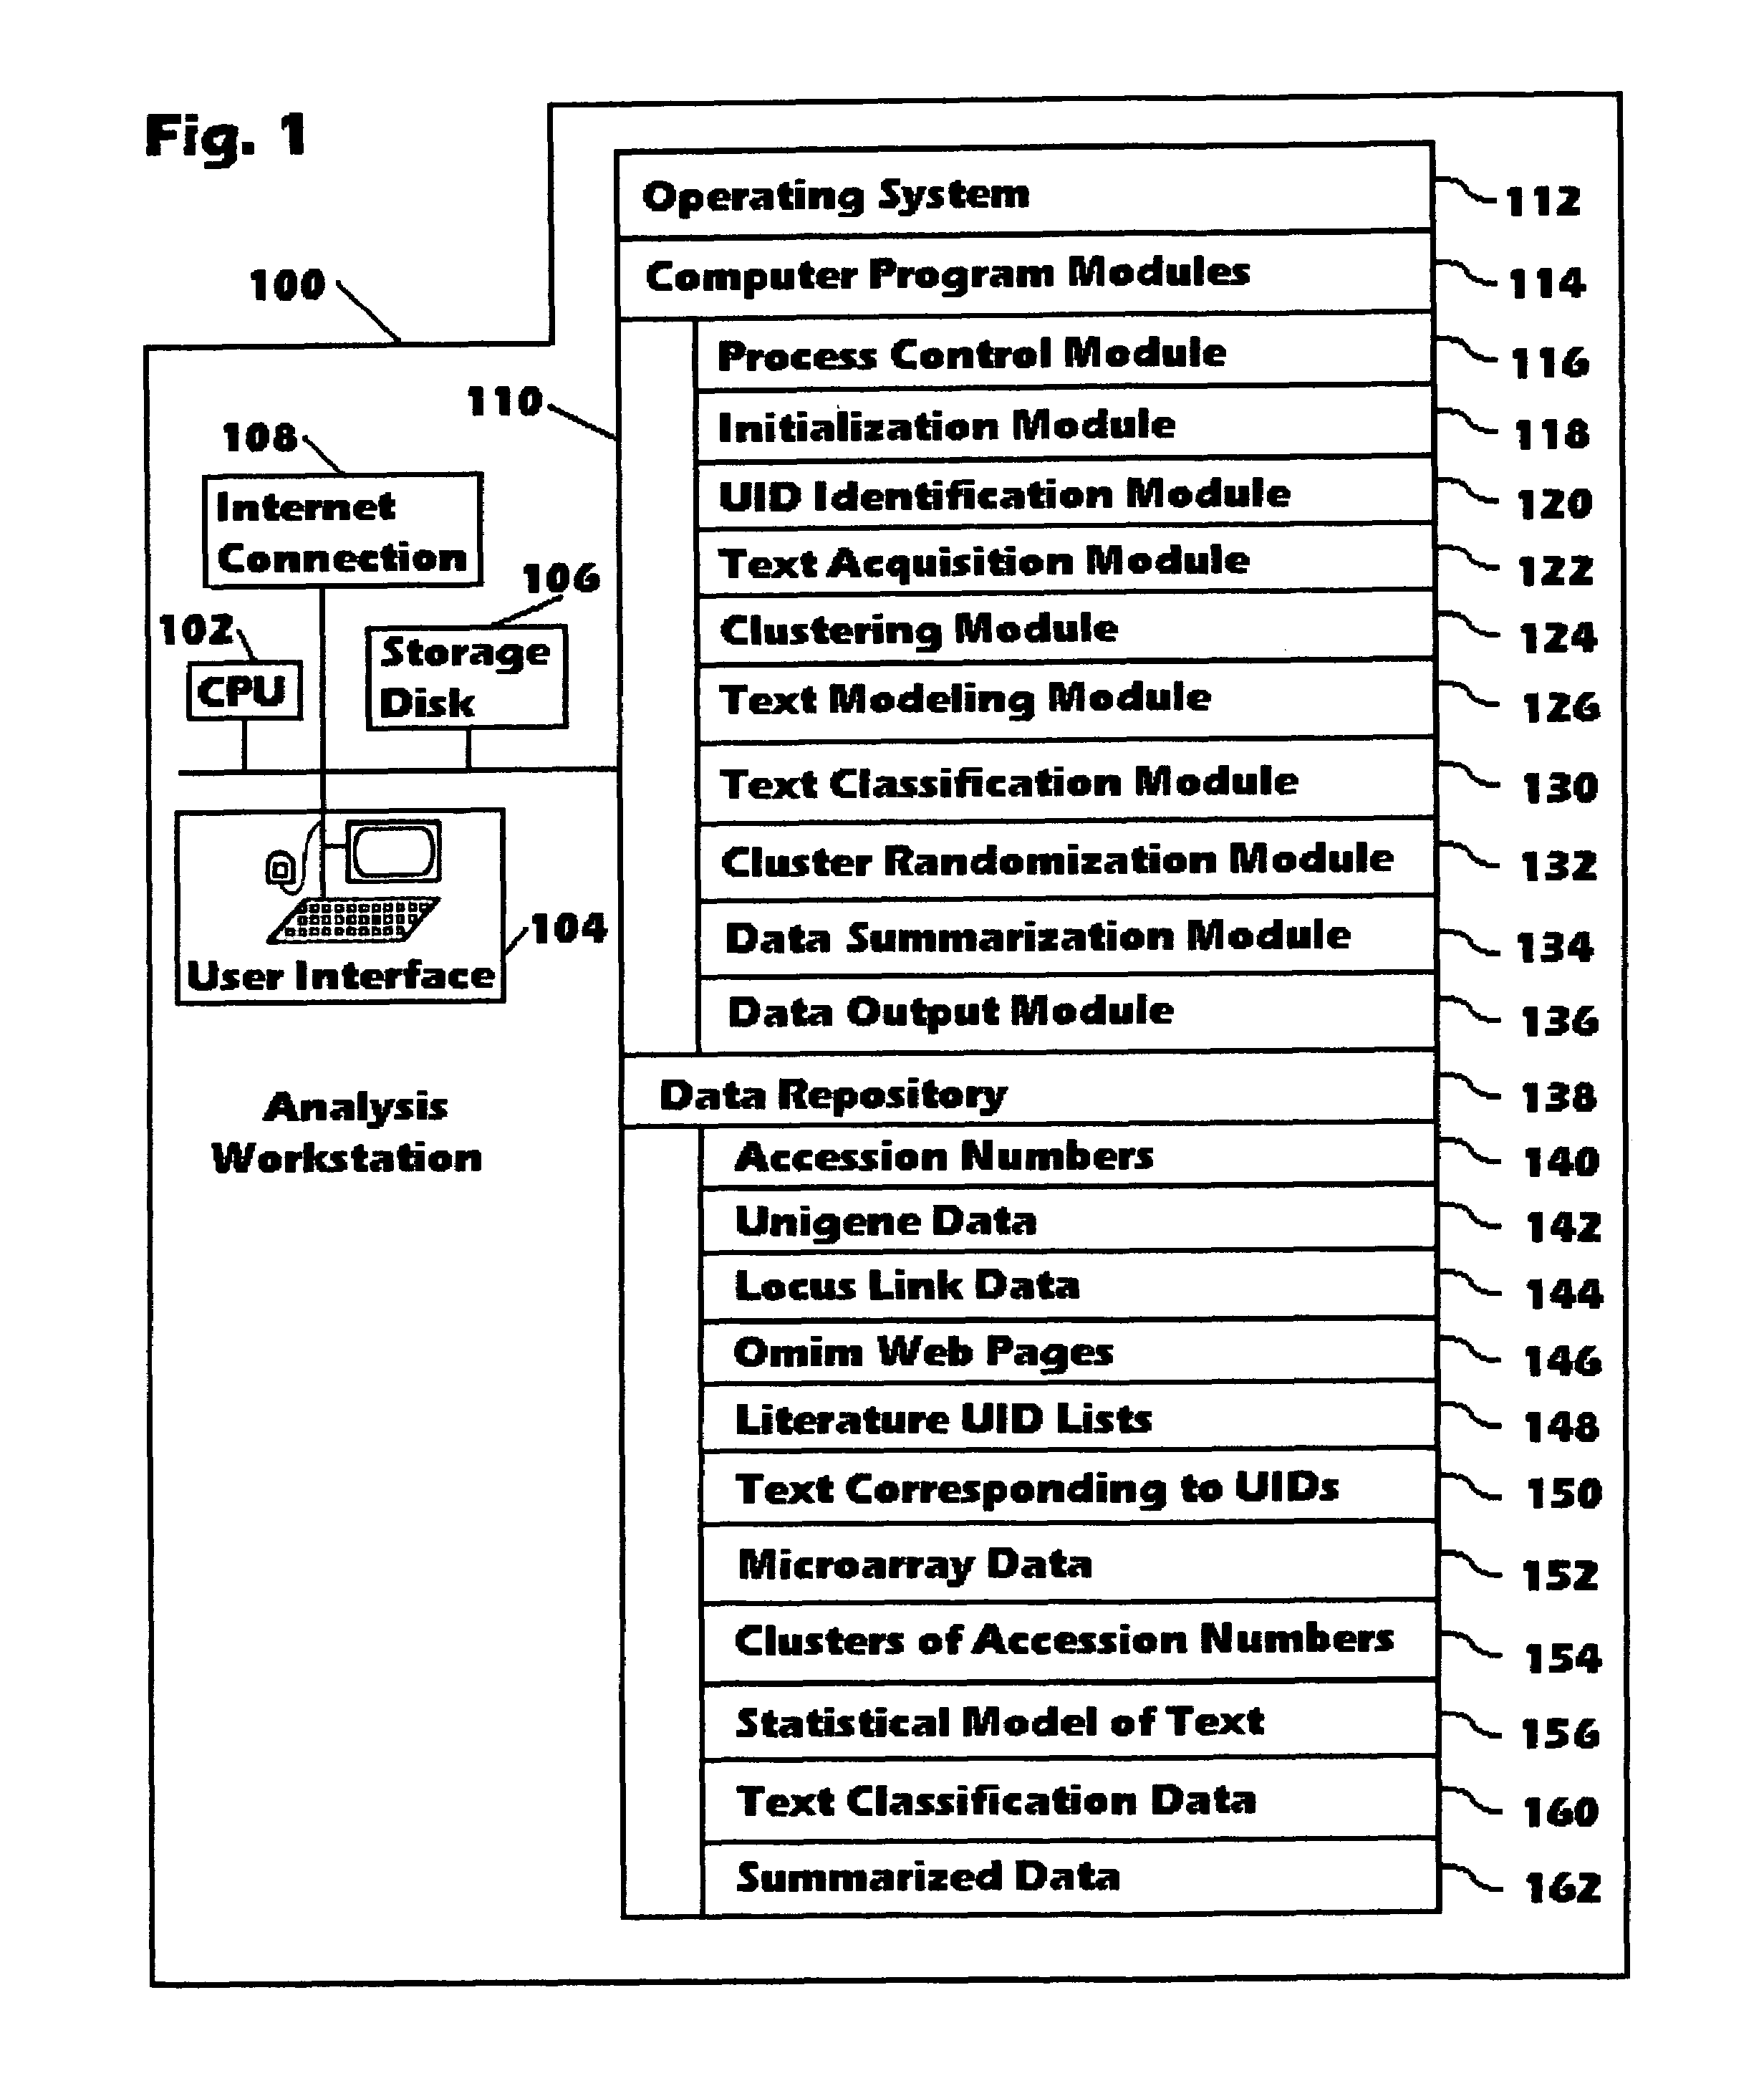 Systems, methods, and computer program product for analyzing microarray data